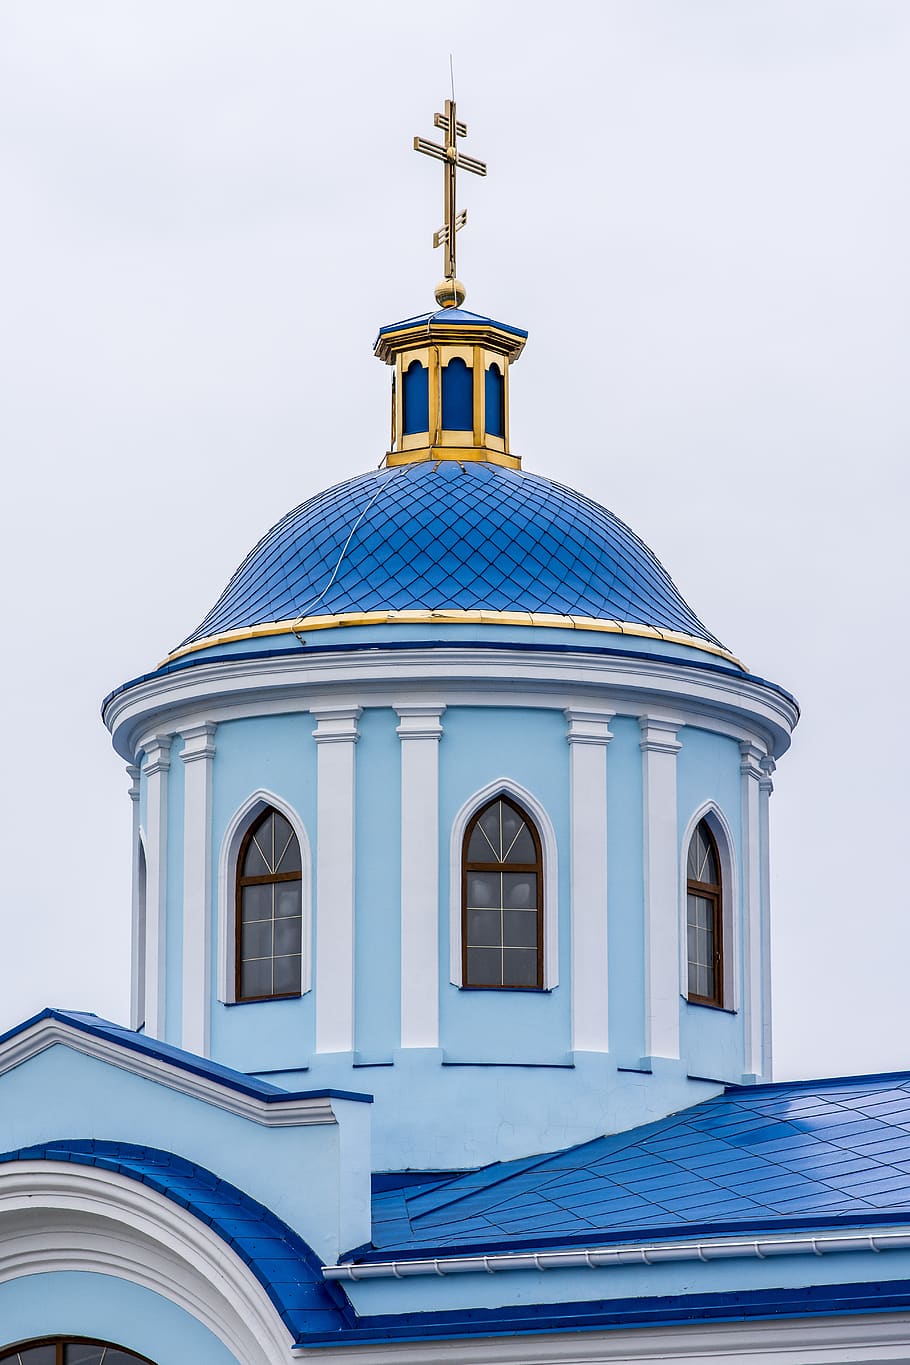 church, architecture, orthodox, cross, religion, outdoors, spirituality, traditional, cupola, orthodoxy